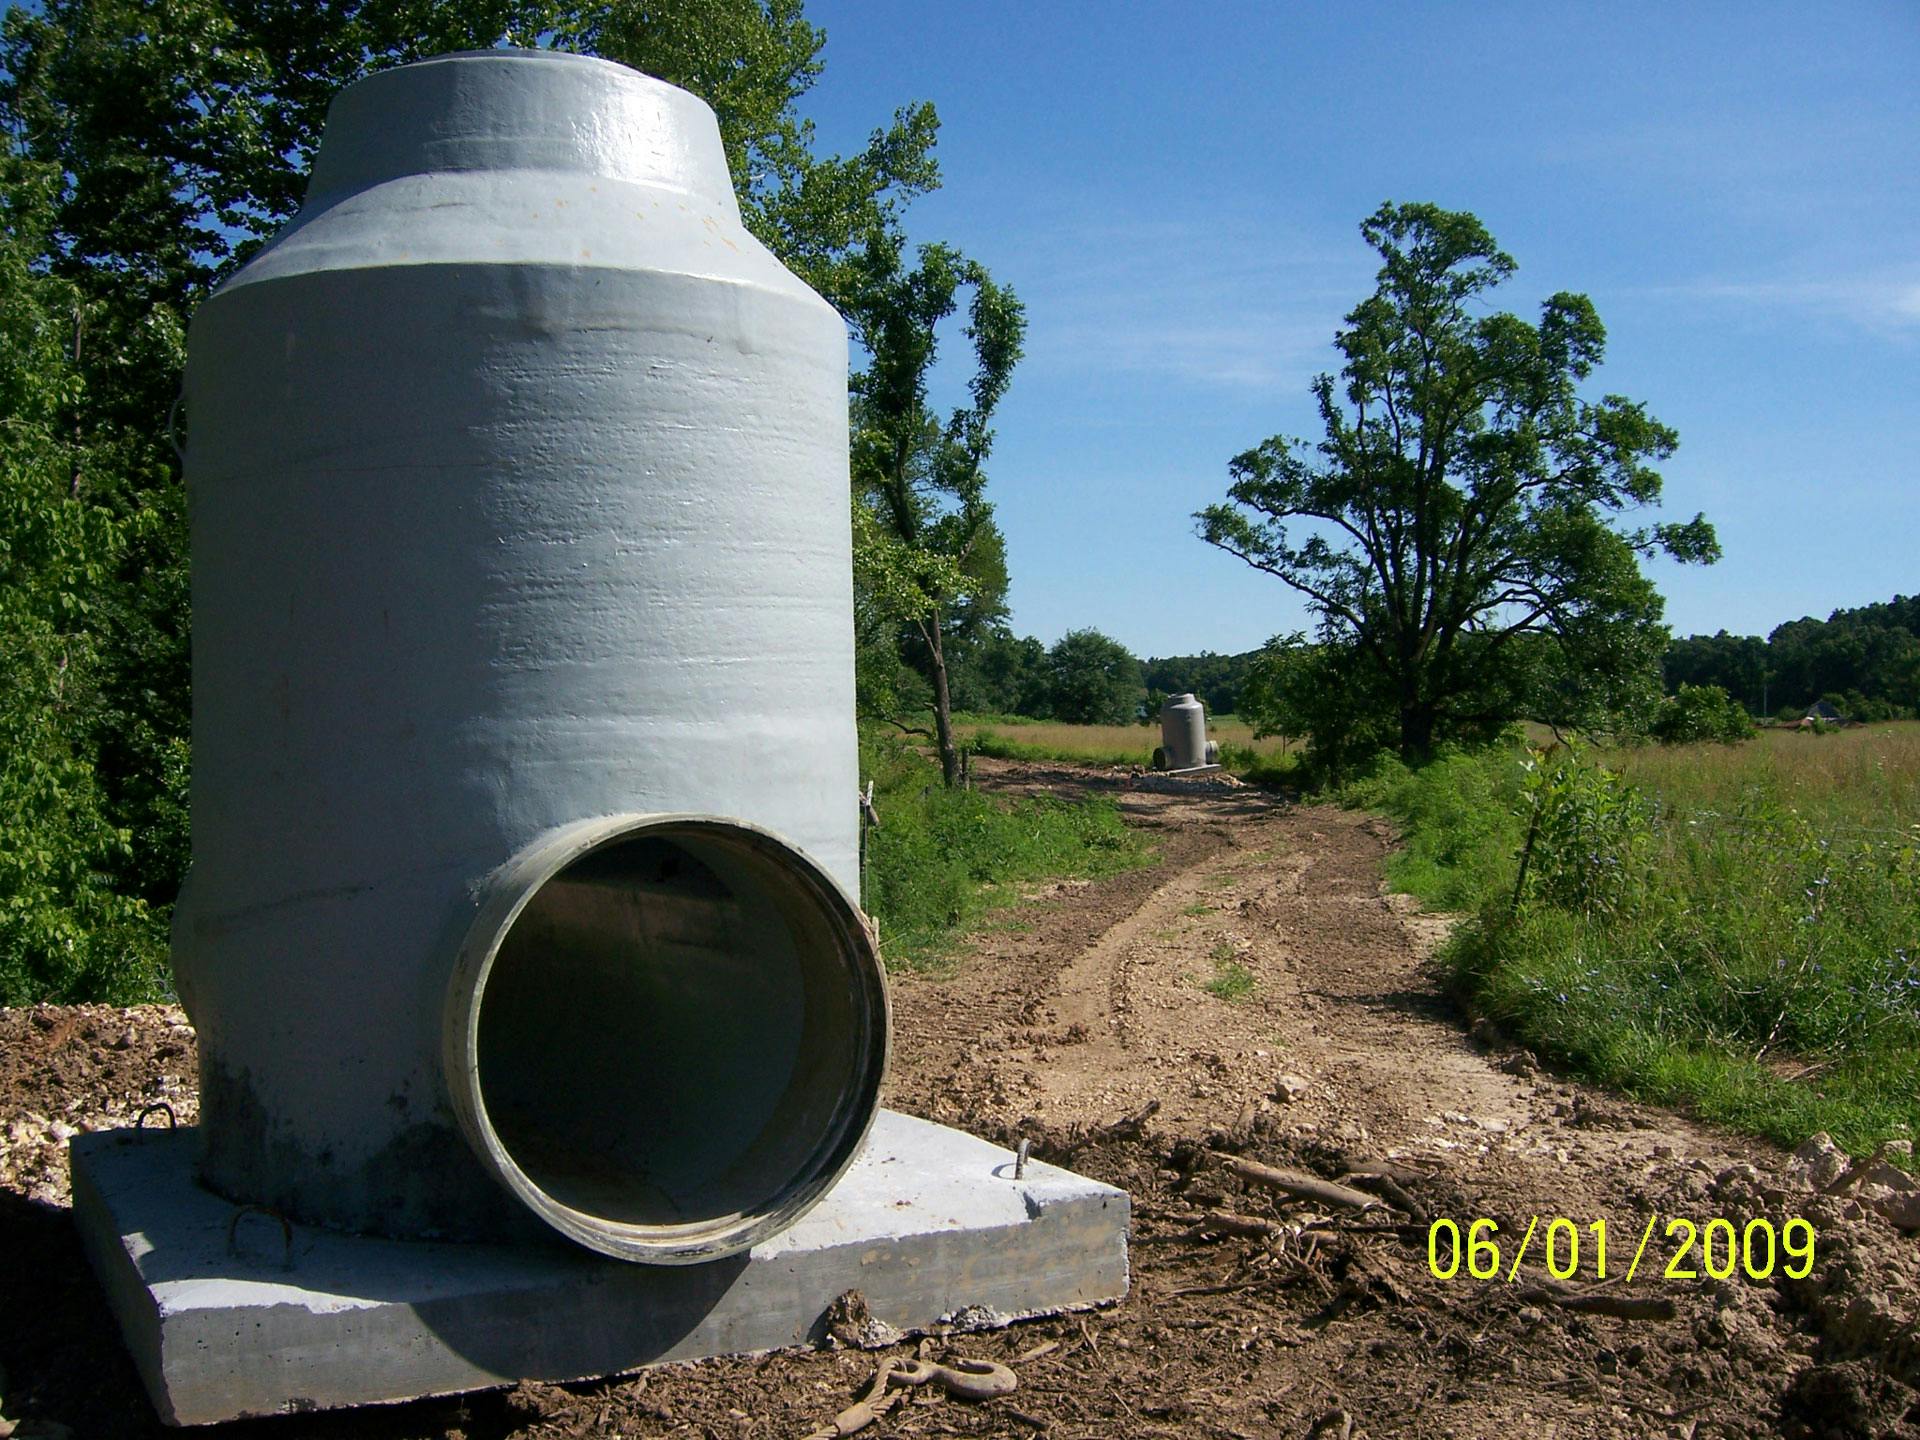 Individual FPR pipe on a concrete base, with trees in the background and a small FRP pipe in the distance